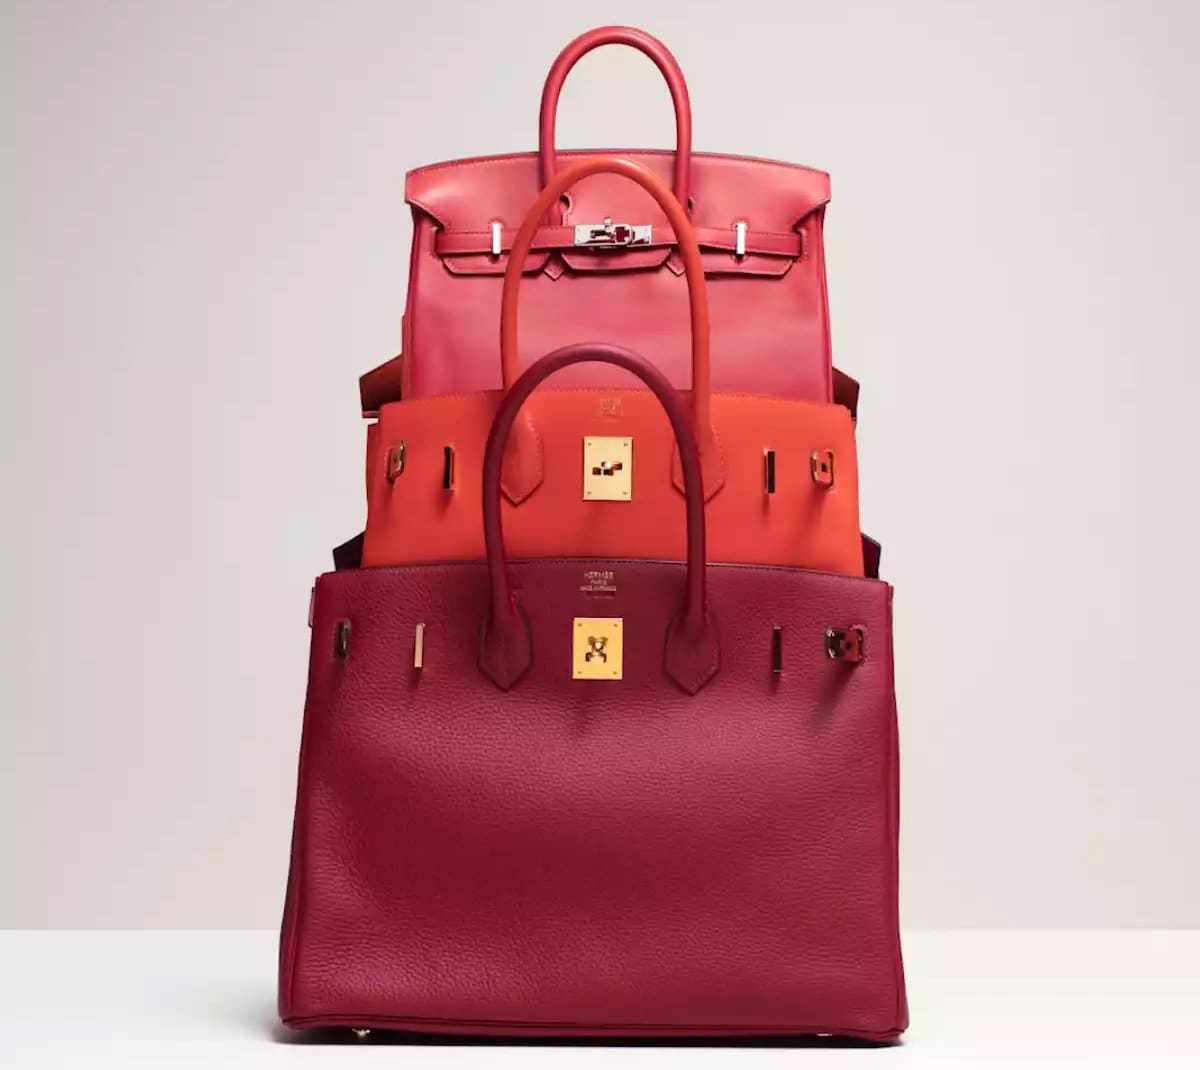 Considered a status symbol, it's not that easy to get your hands on an Hermes Kelly or Birkin bag